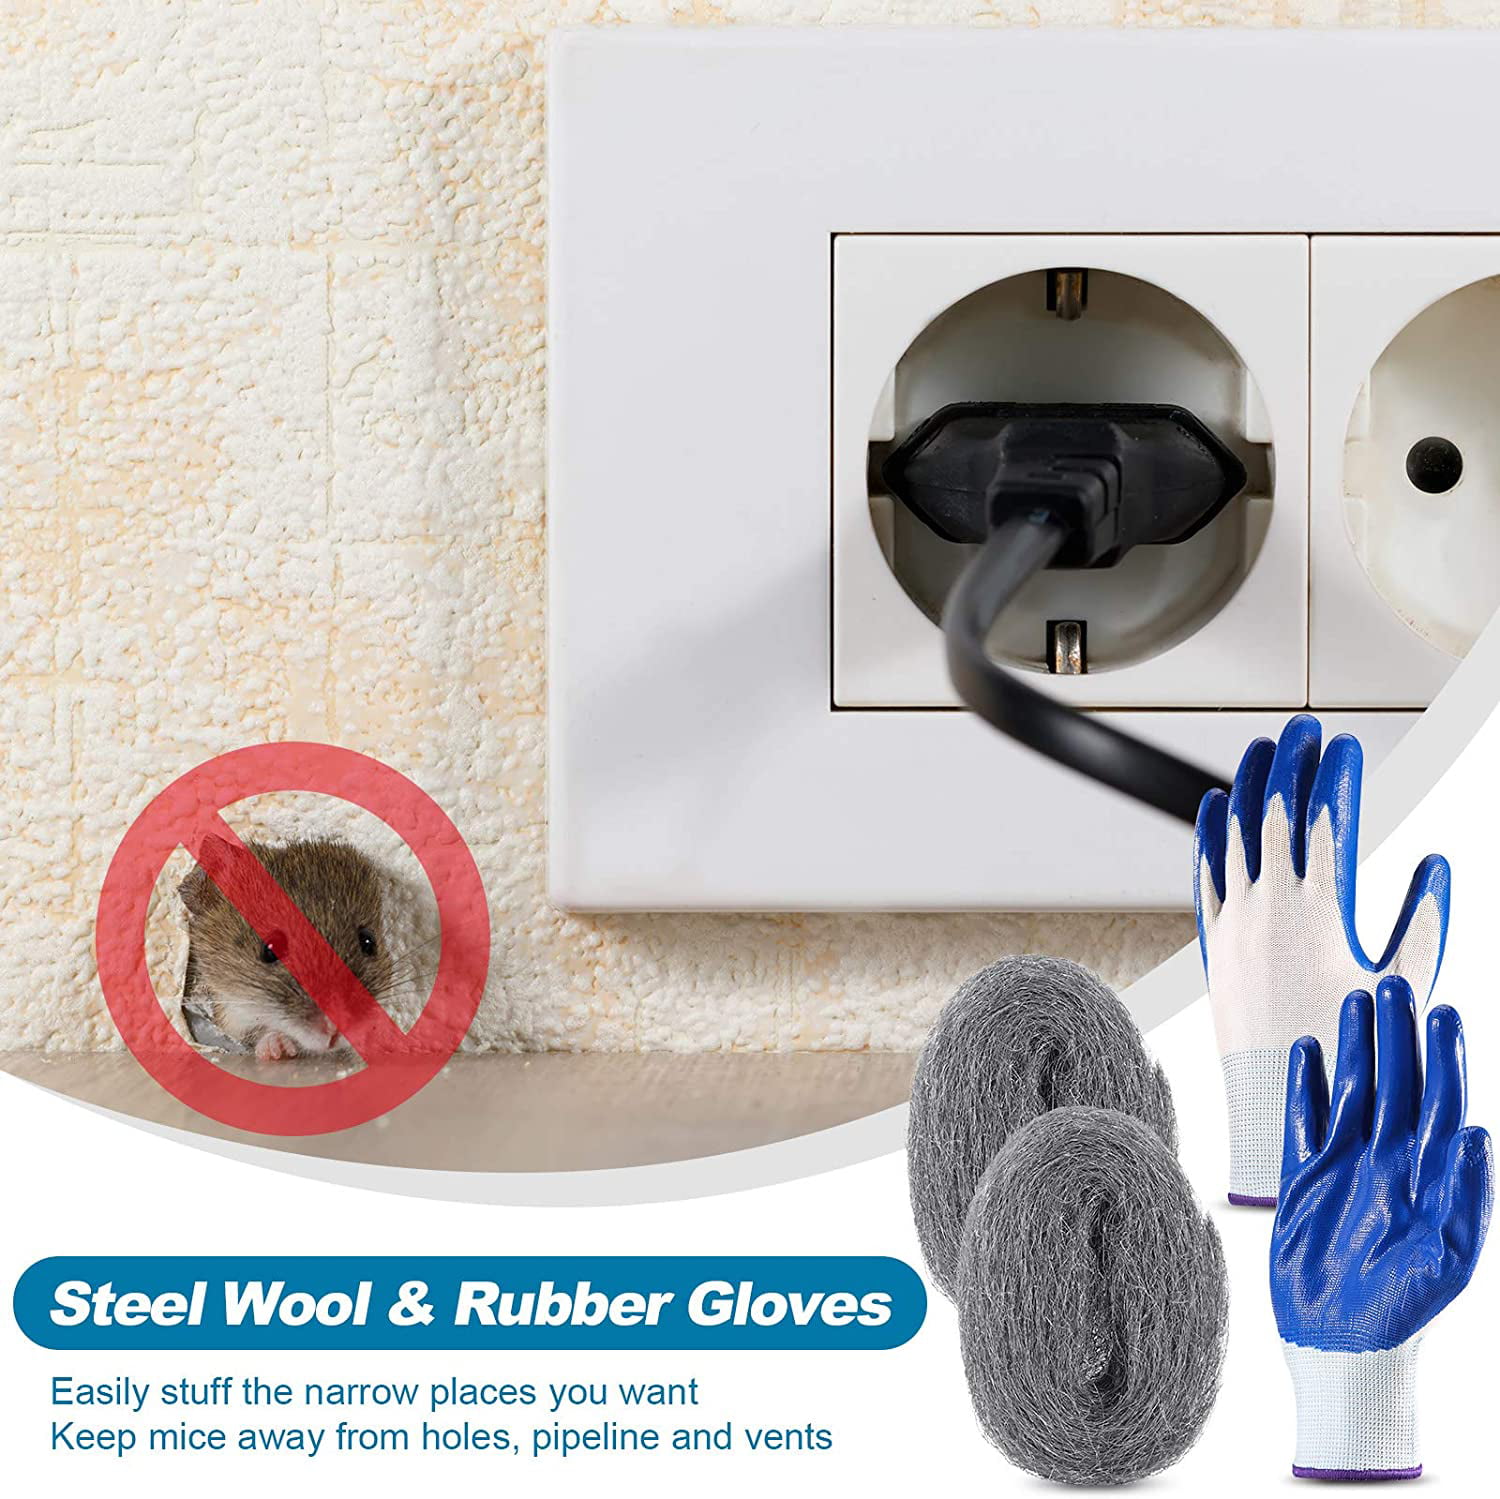 Includes 2 Pieces Coarse Steel Wire Wool and 1 Piece Rubber Work Gloves Hardware Cloth Gap Blocker Keep Mice Away from Hole Vent in Garden House Workshop 3 Pieces Steel Wool Roll Fill Fabric DIY Kit 